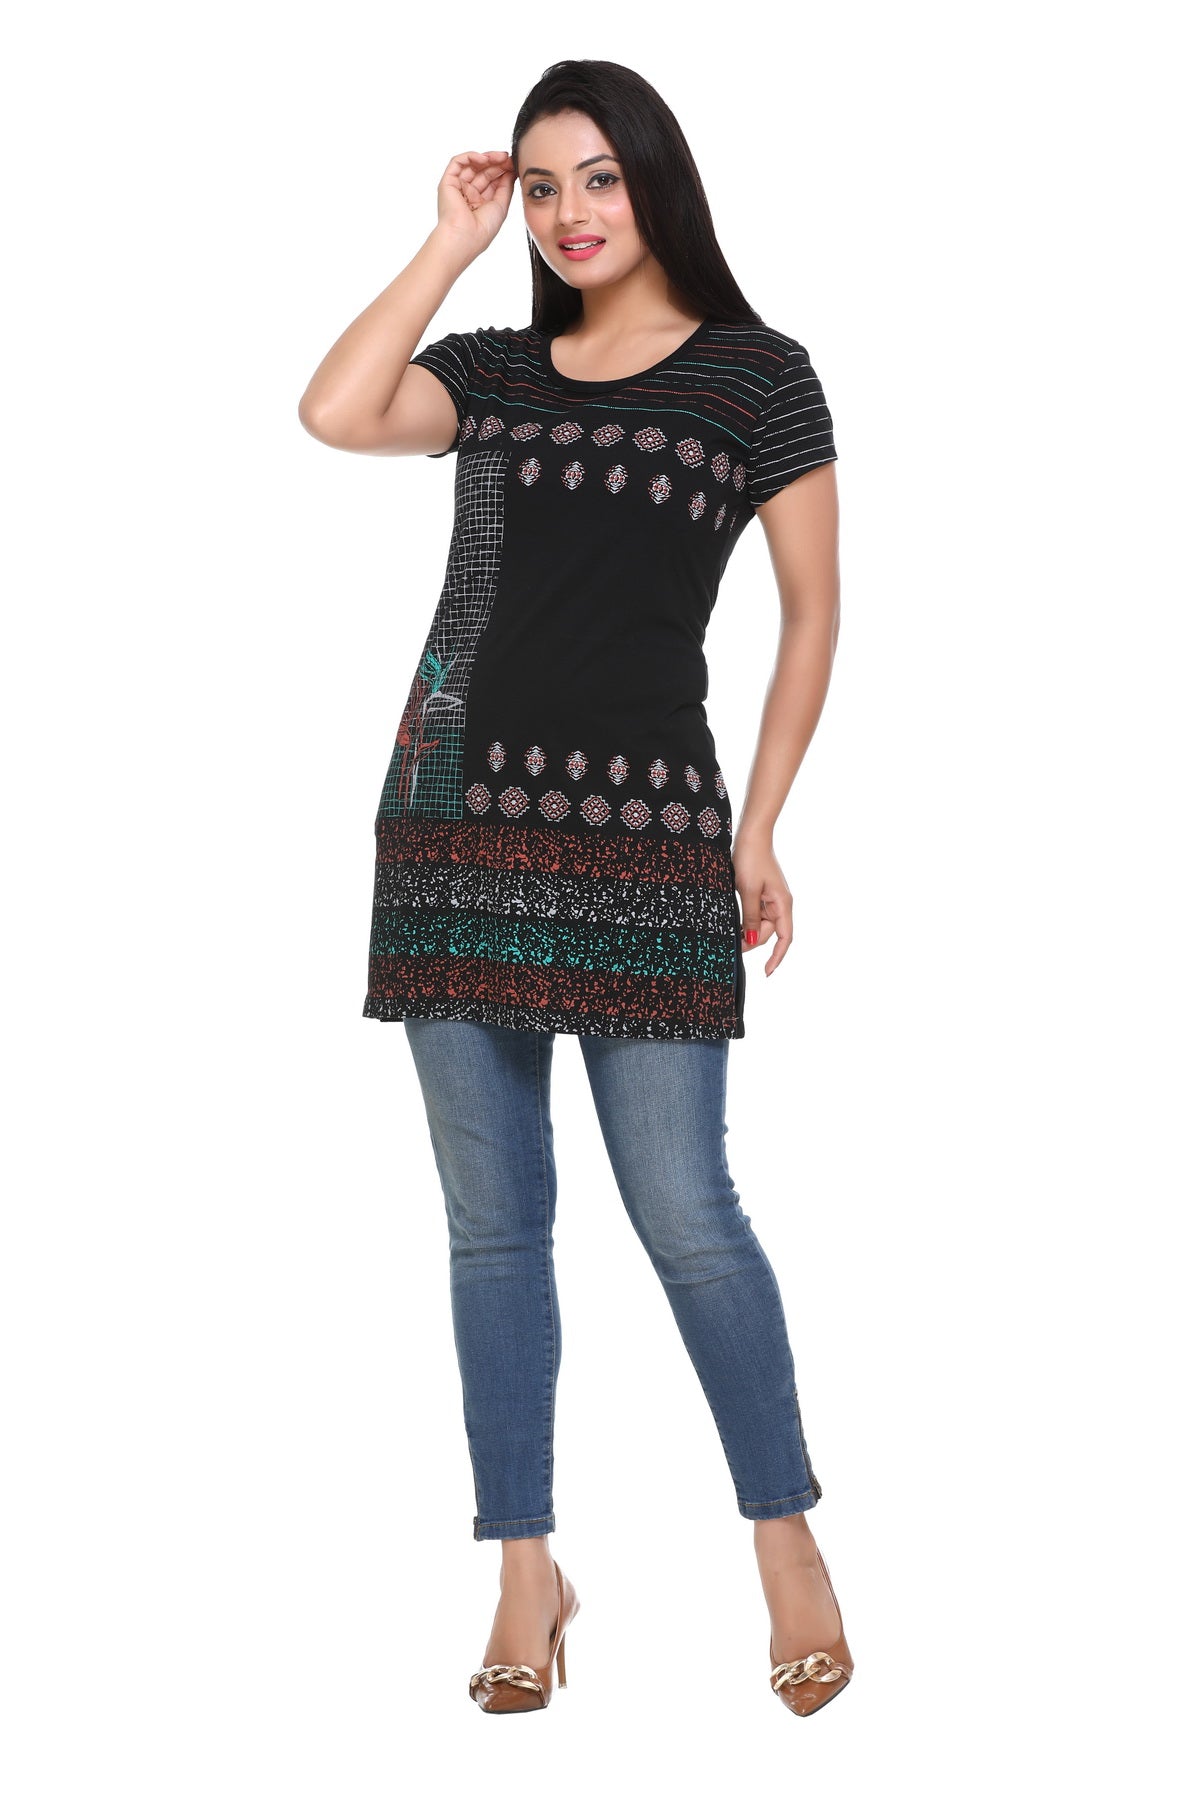 Comfy Black Printed Cotton Long T-shirt For Women (Half Sleeves) Online In India